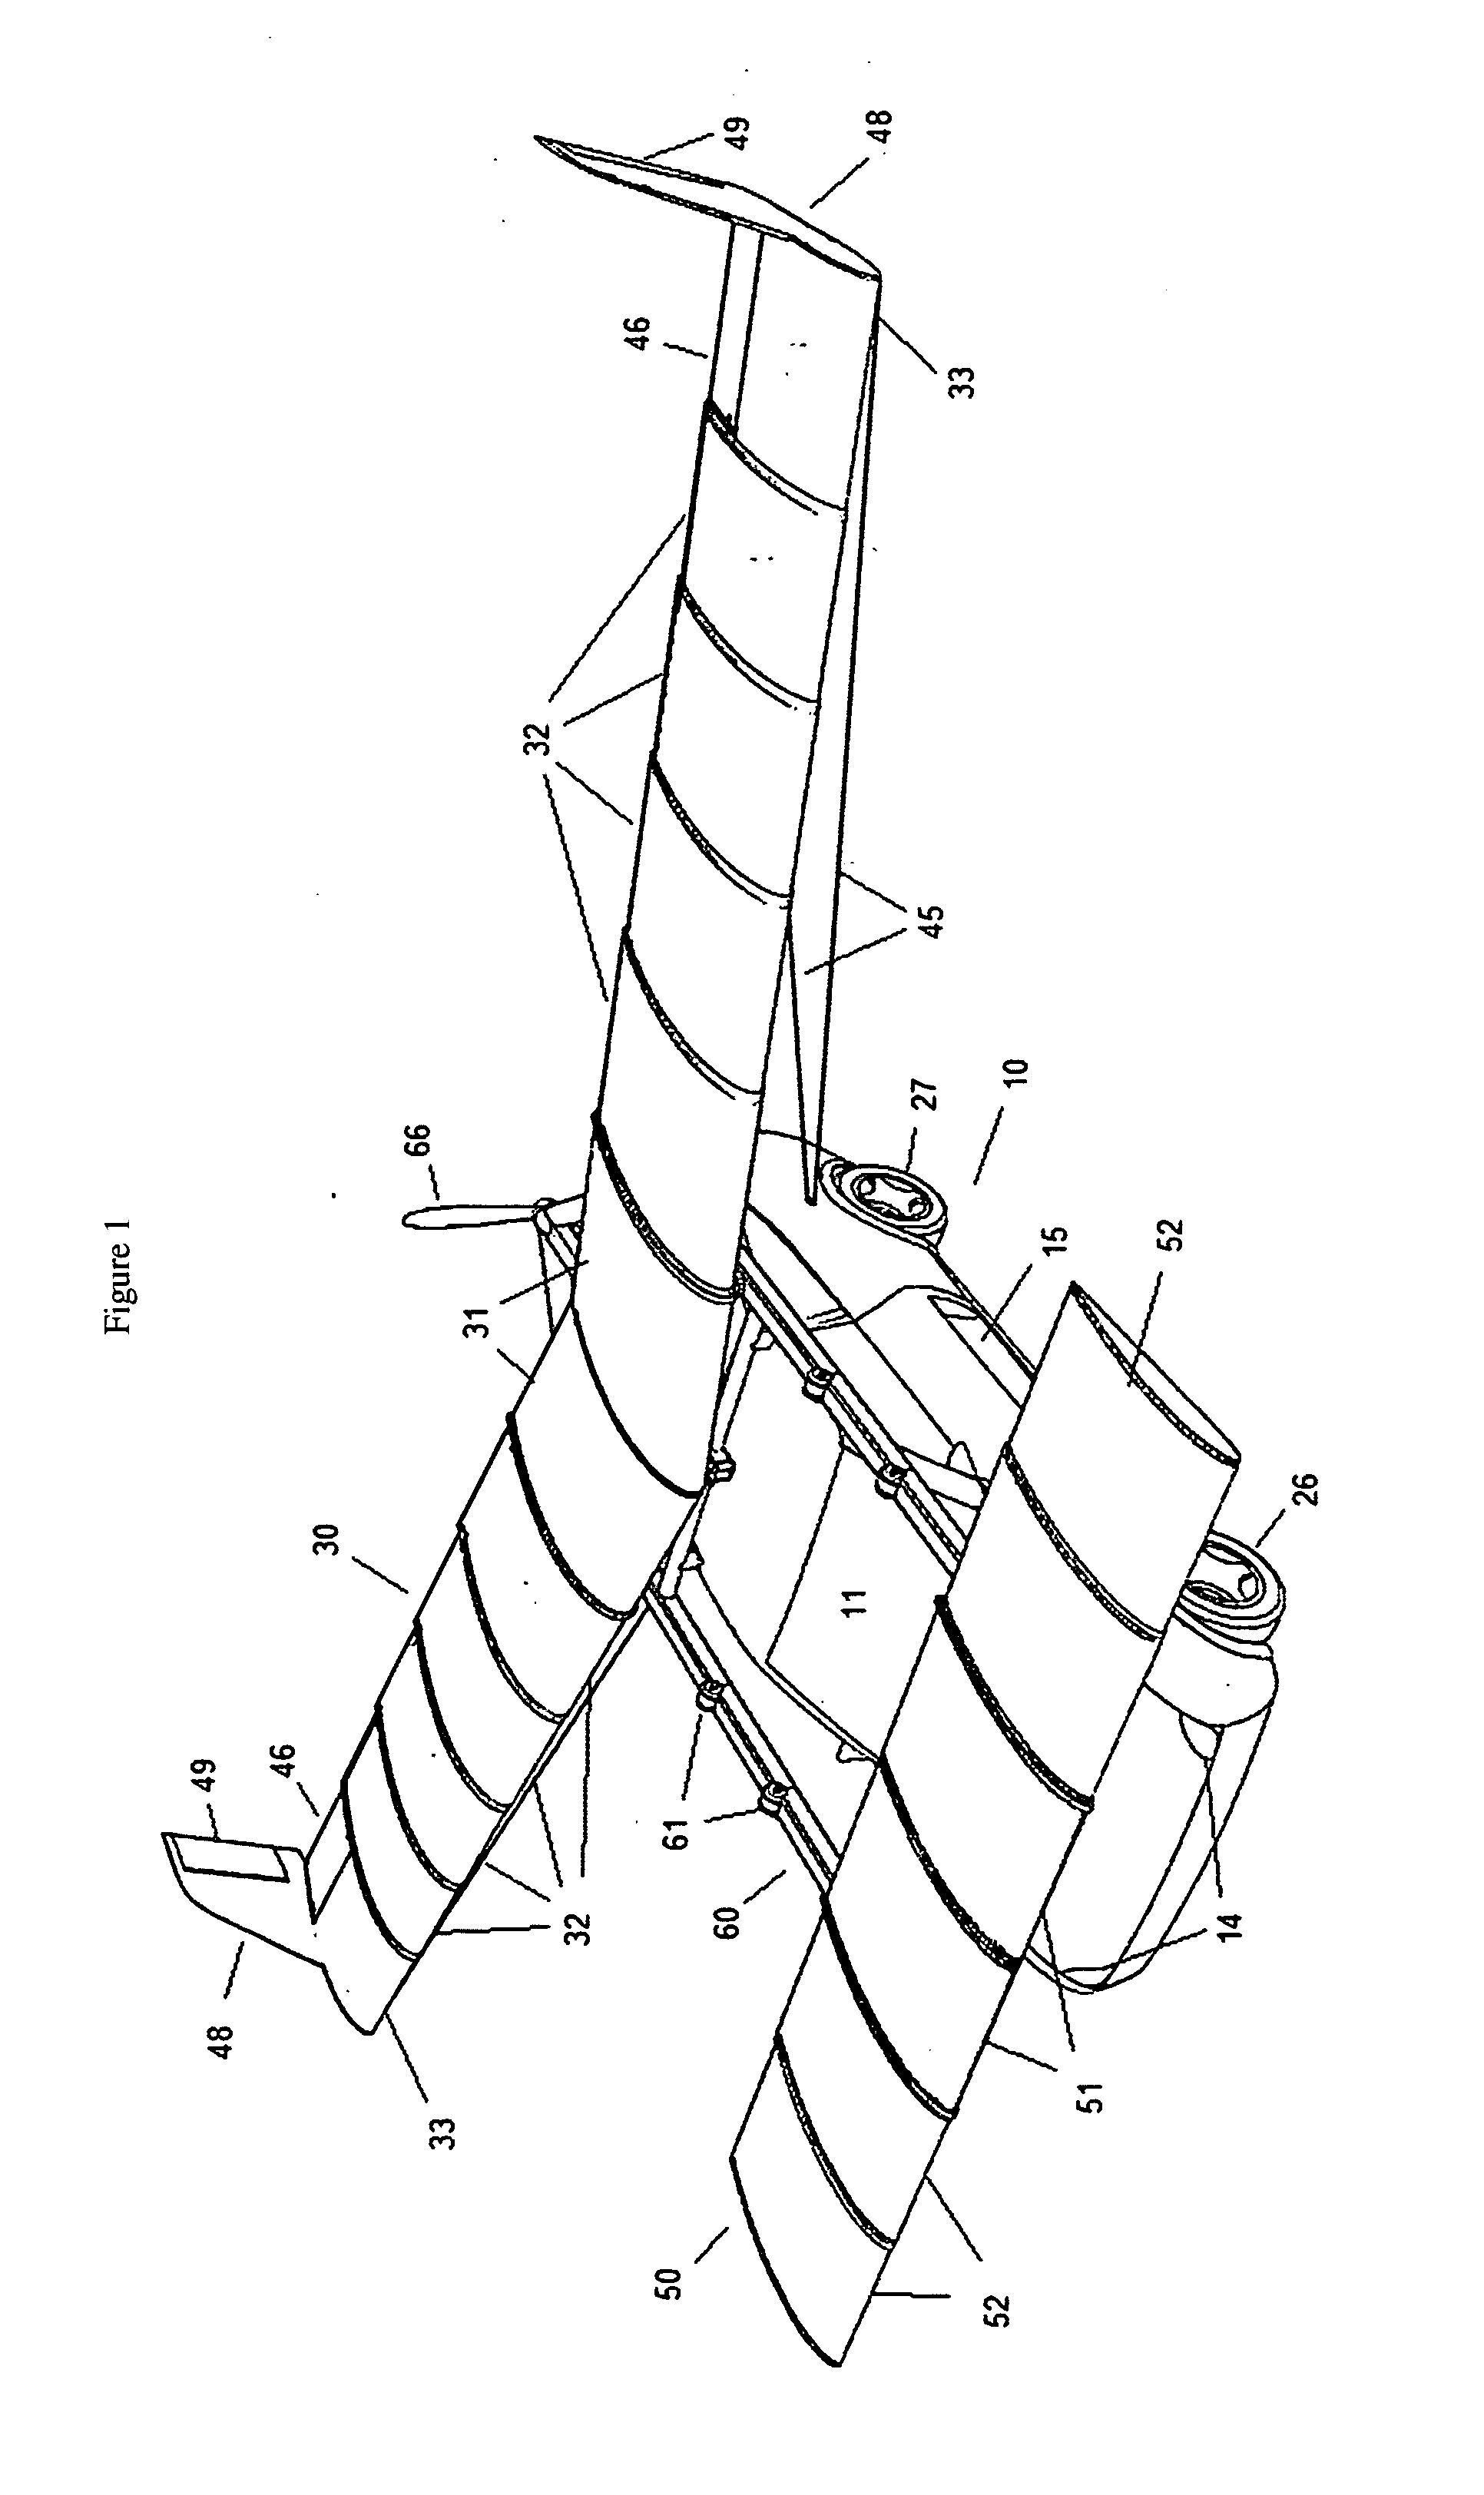 Telescopic Wing and Rack System for Automotive Airplane